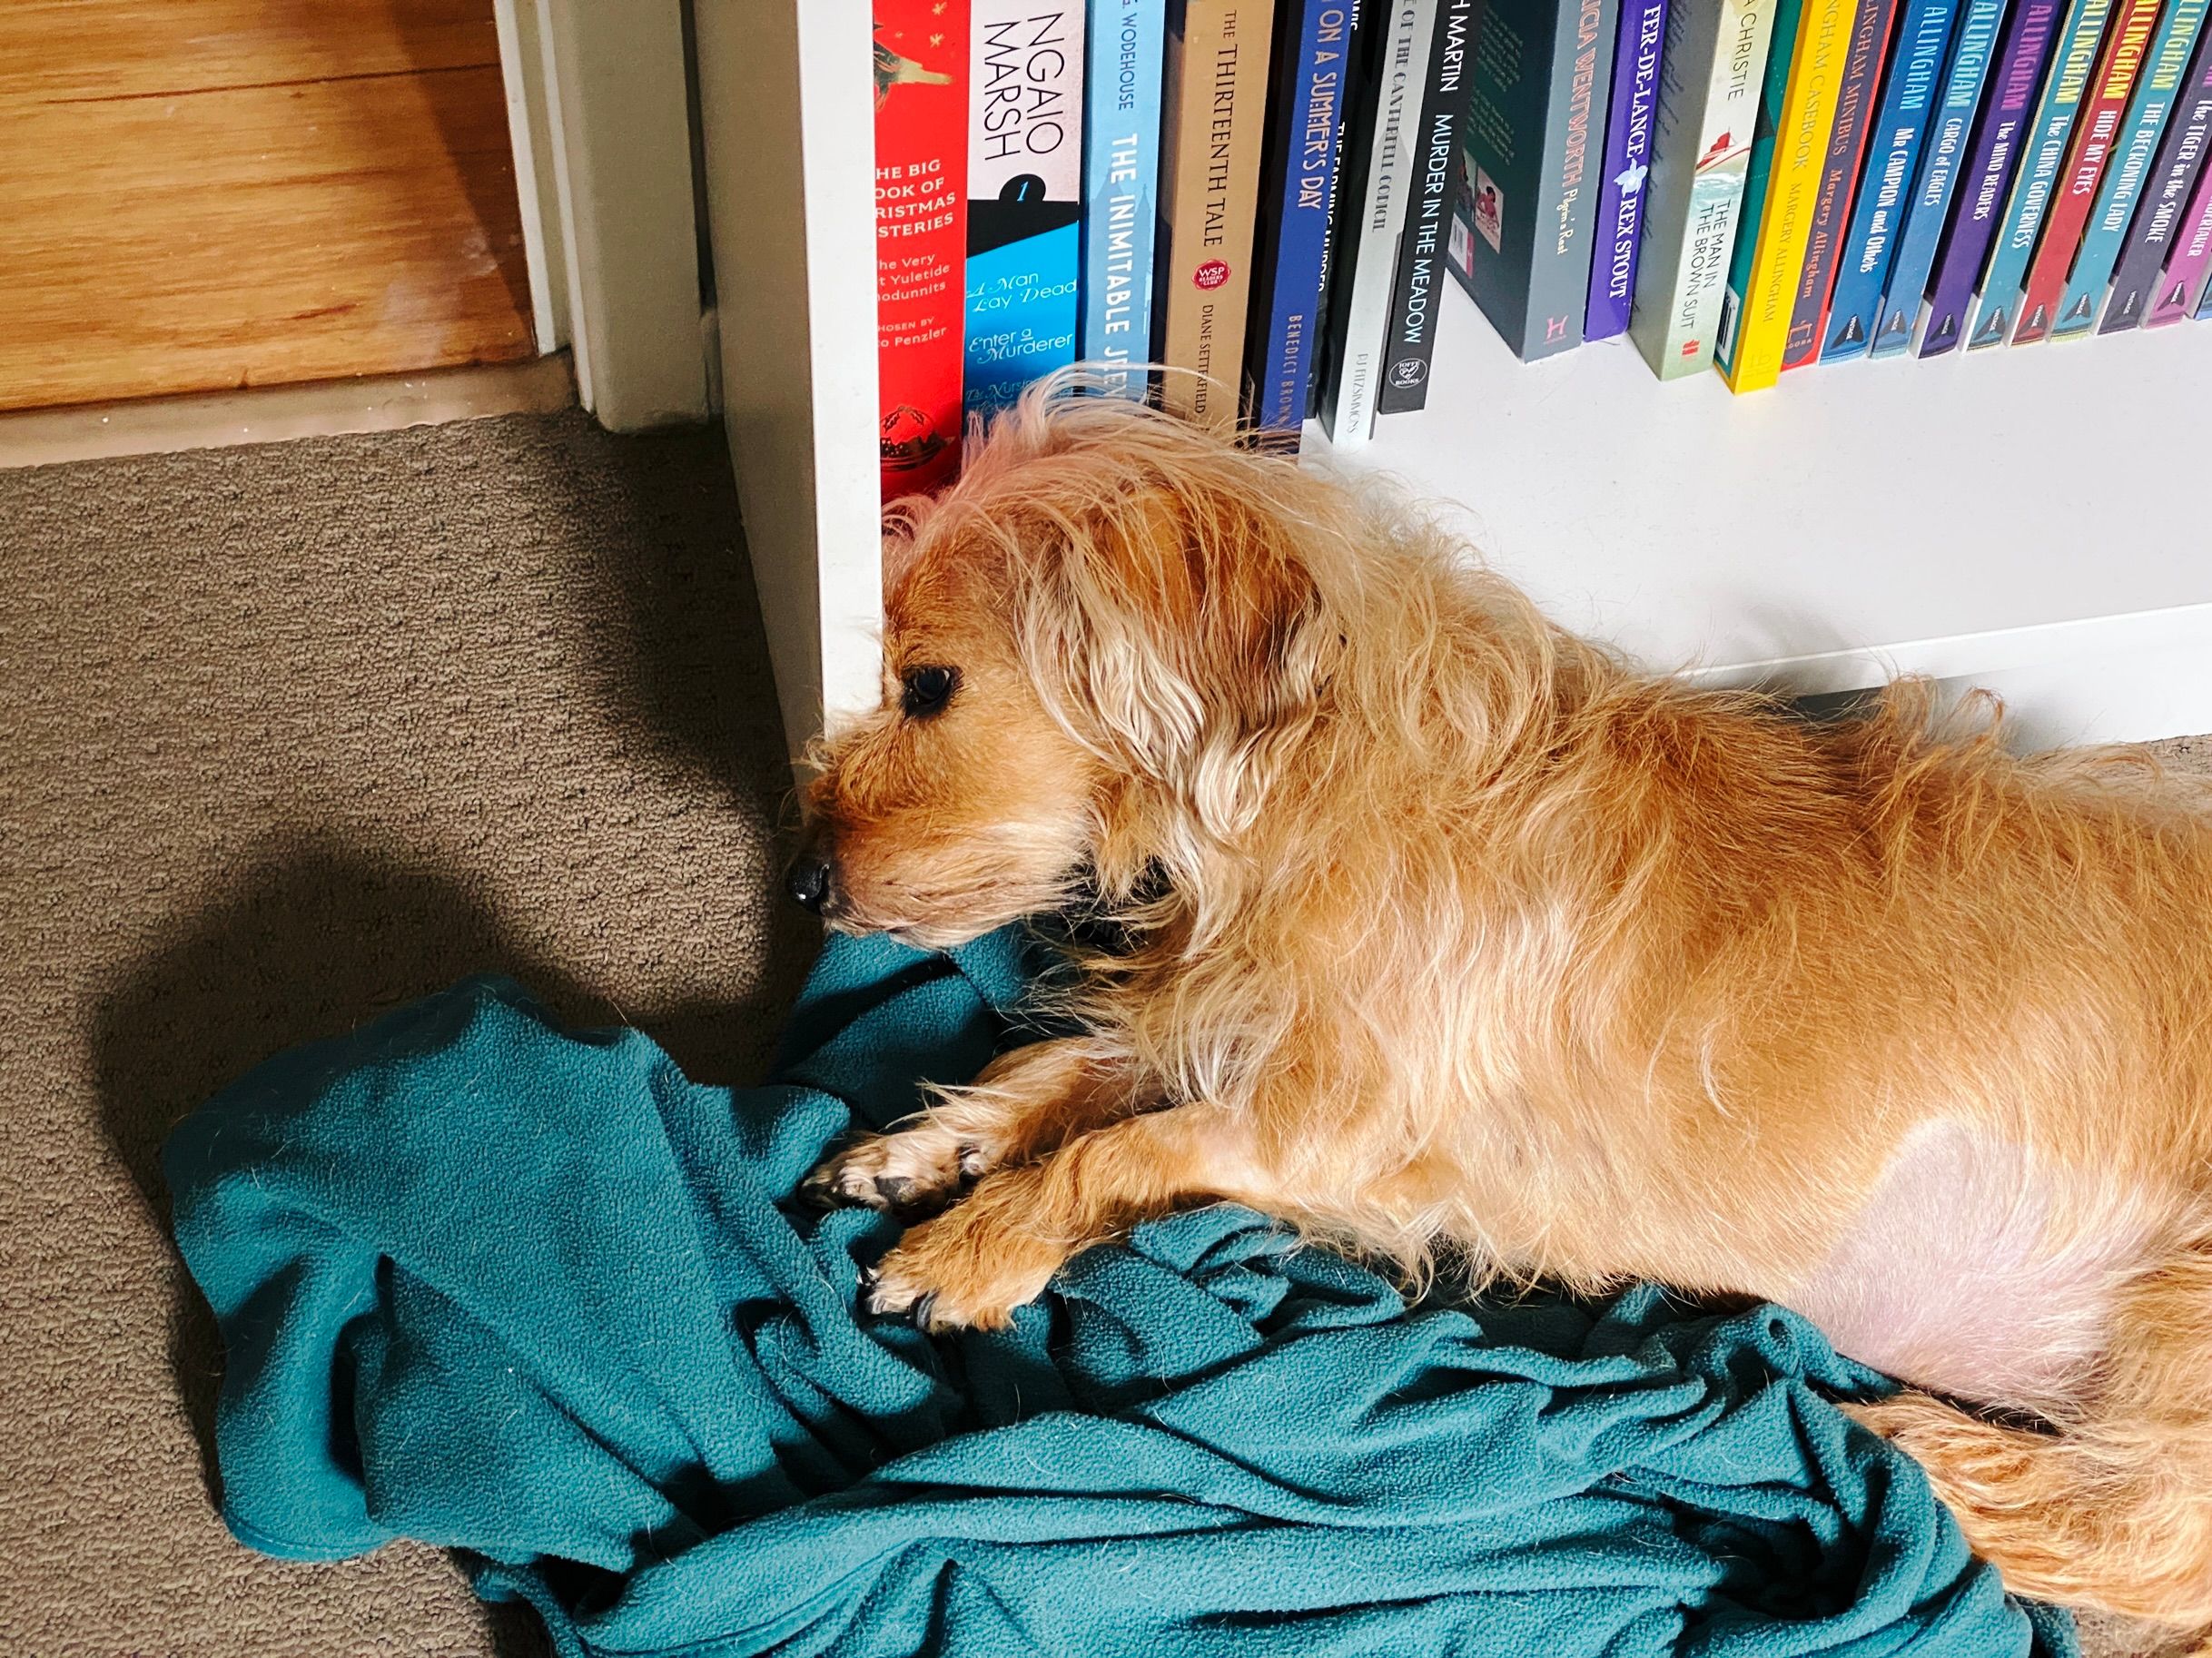 A photo of a small scruffy blonde dog lying on a blue/green blanket on the floor next to a white bookshelf. His body is in the blanket but the side of his head is resting on the edge of the bottom shelf of the bookshelf which seems like it would be very uncomfortable but is apparently not.